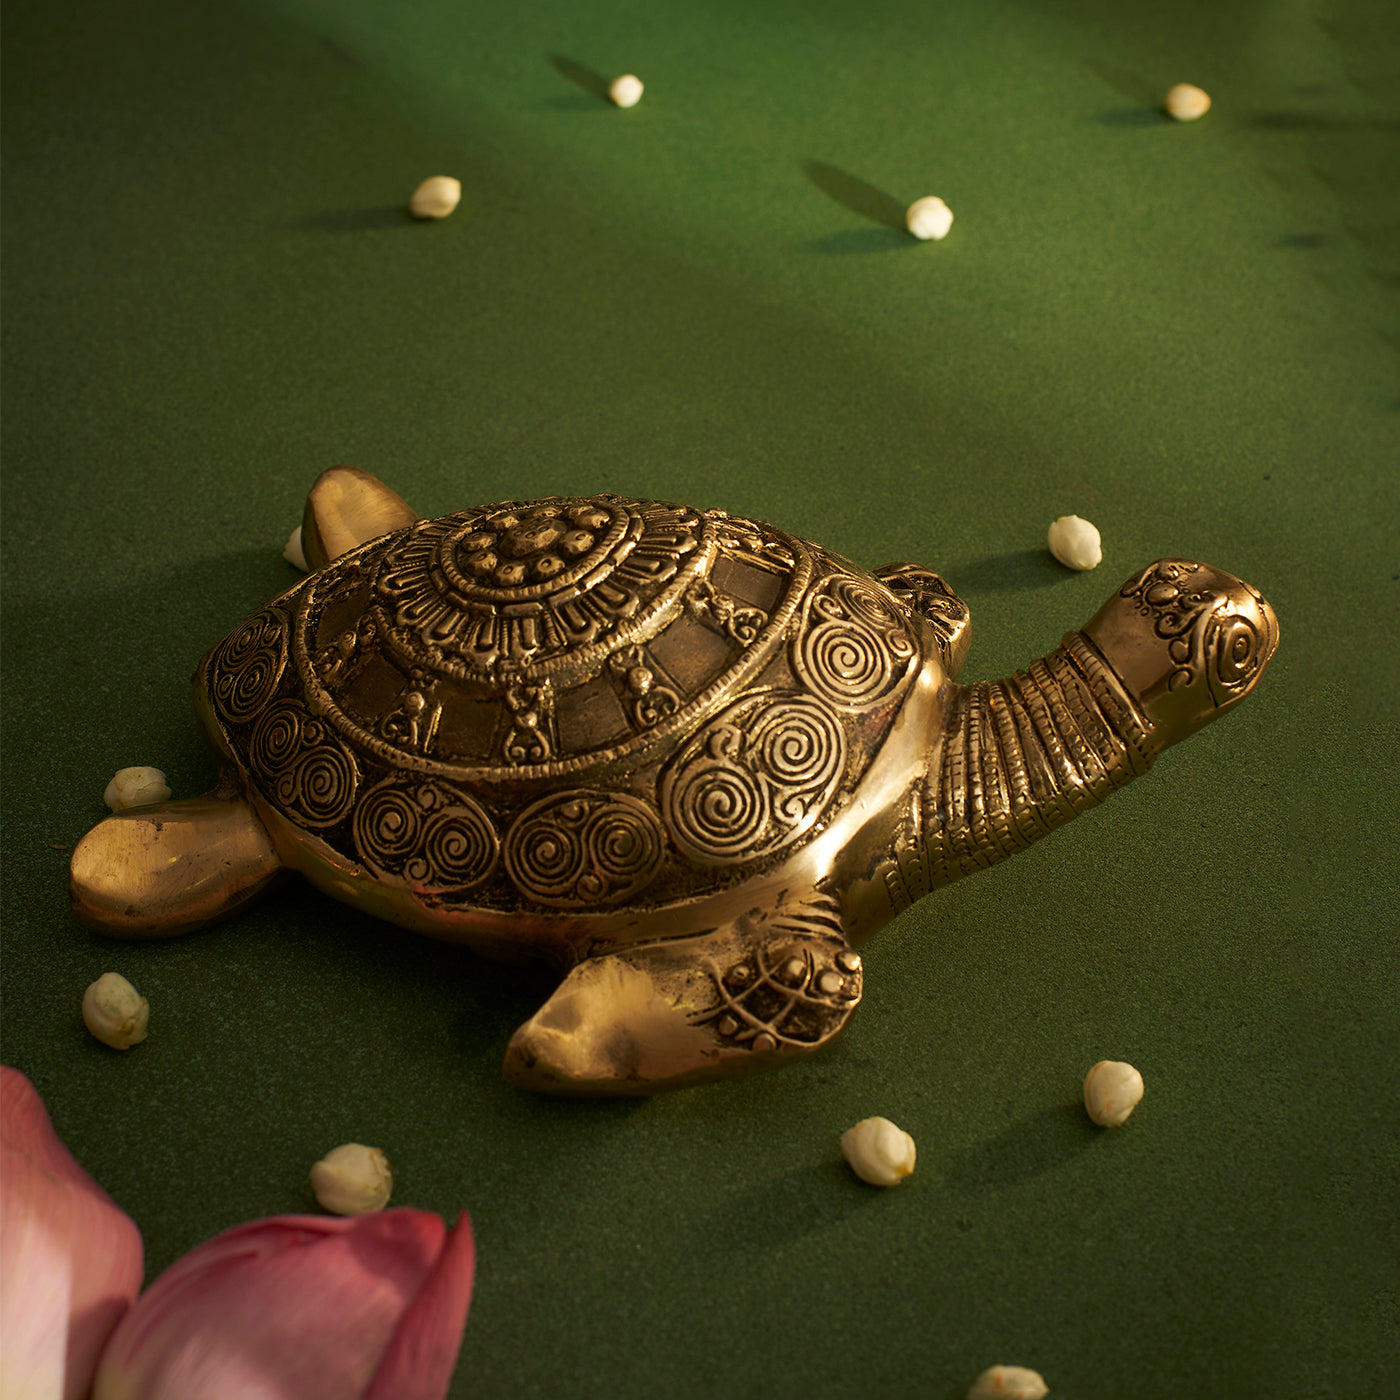 Big Brass Tortoise Showpiece for Good Luck, Long Life and Career